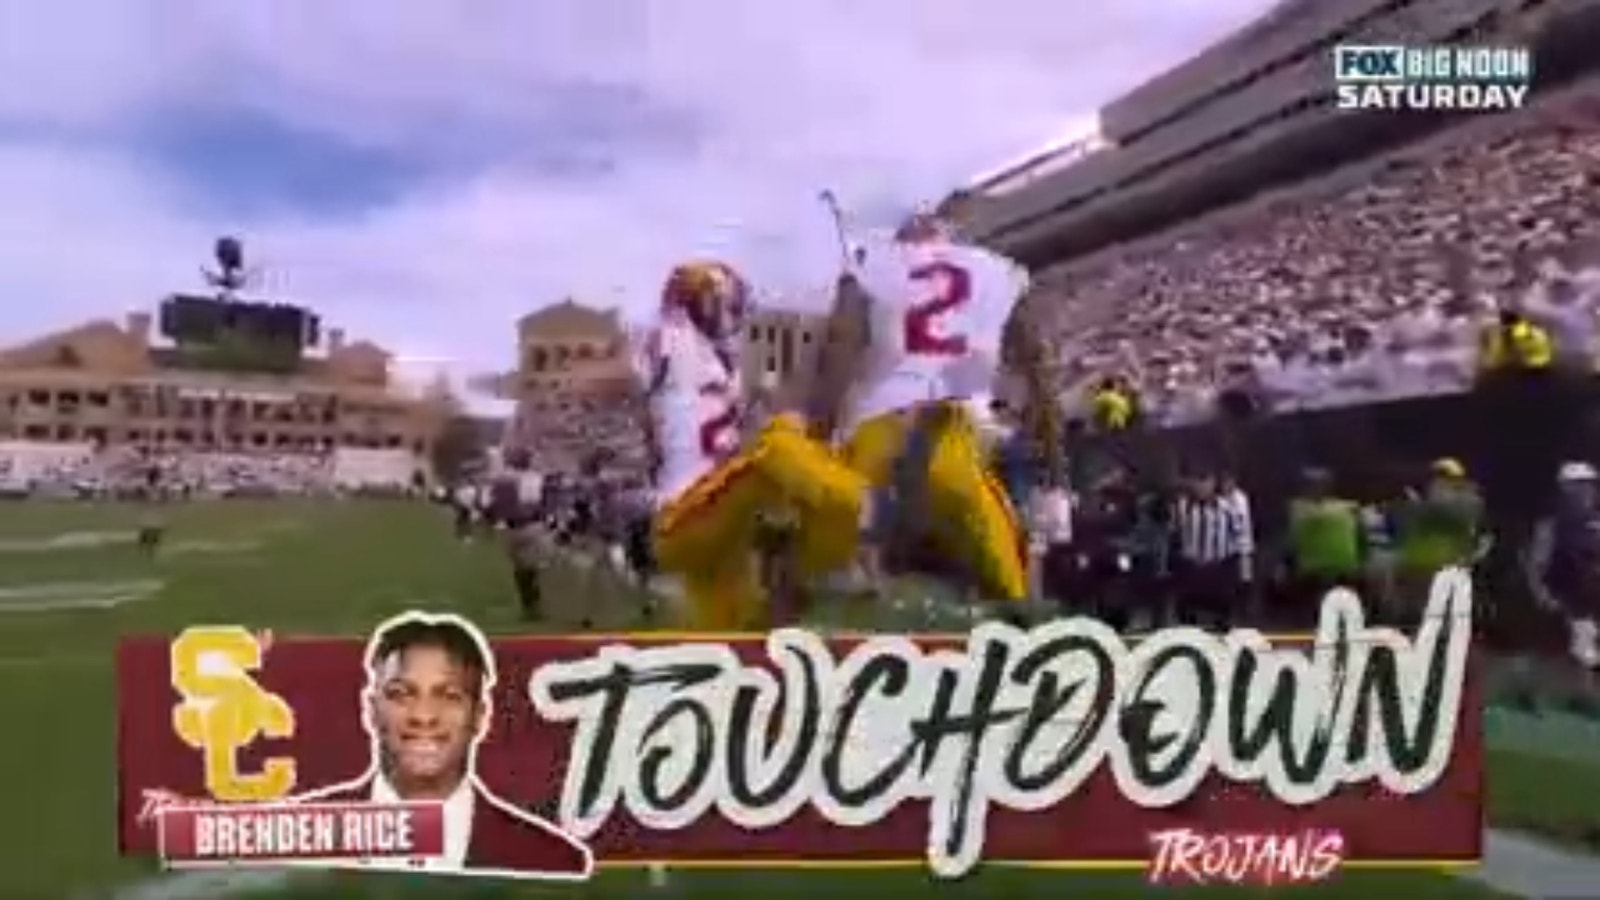 Caleb Williams throws a 26-yard TD to Brenden Rice to extend USC's lead against Colorado